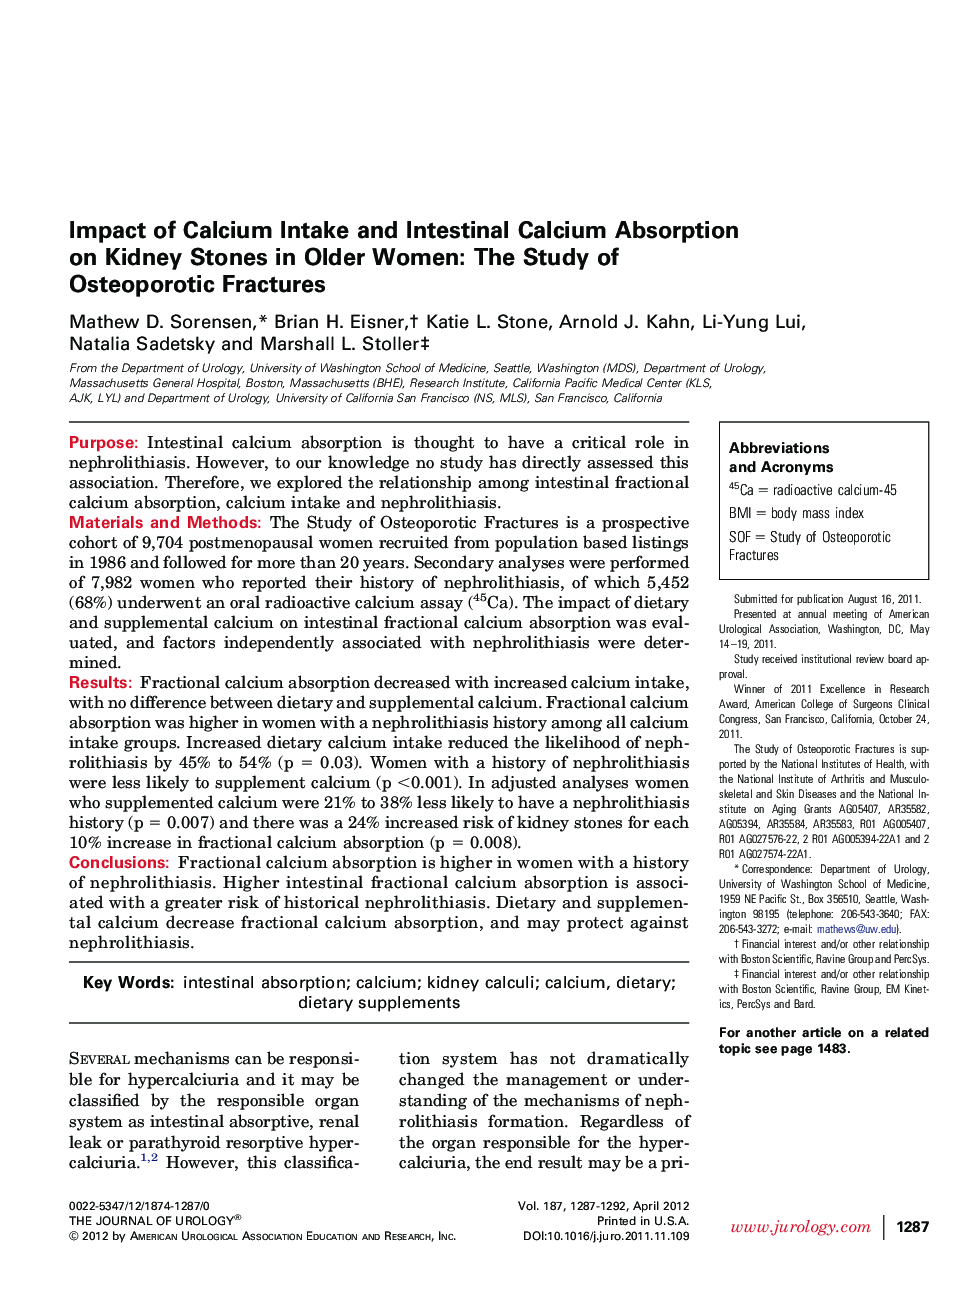 Impact of Calcium Intake and Intestinal Calcium Absorption on Kidney Stones in Older Women: The Study of Osteoporotic Fractures 